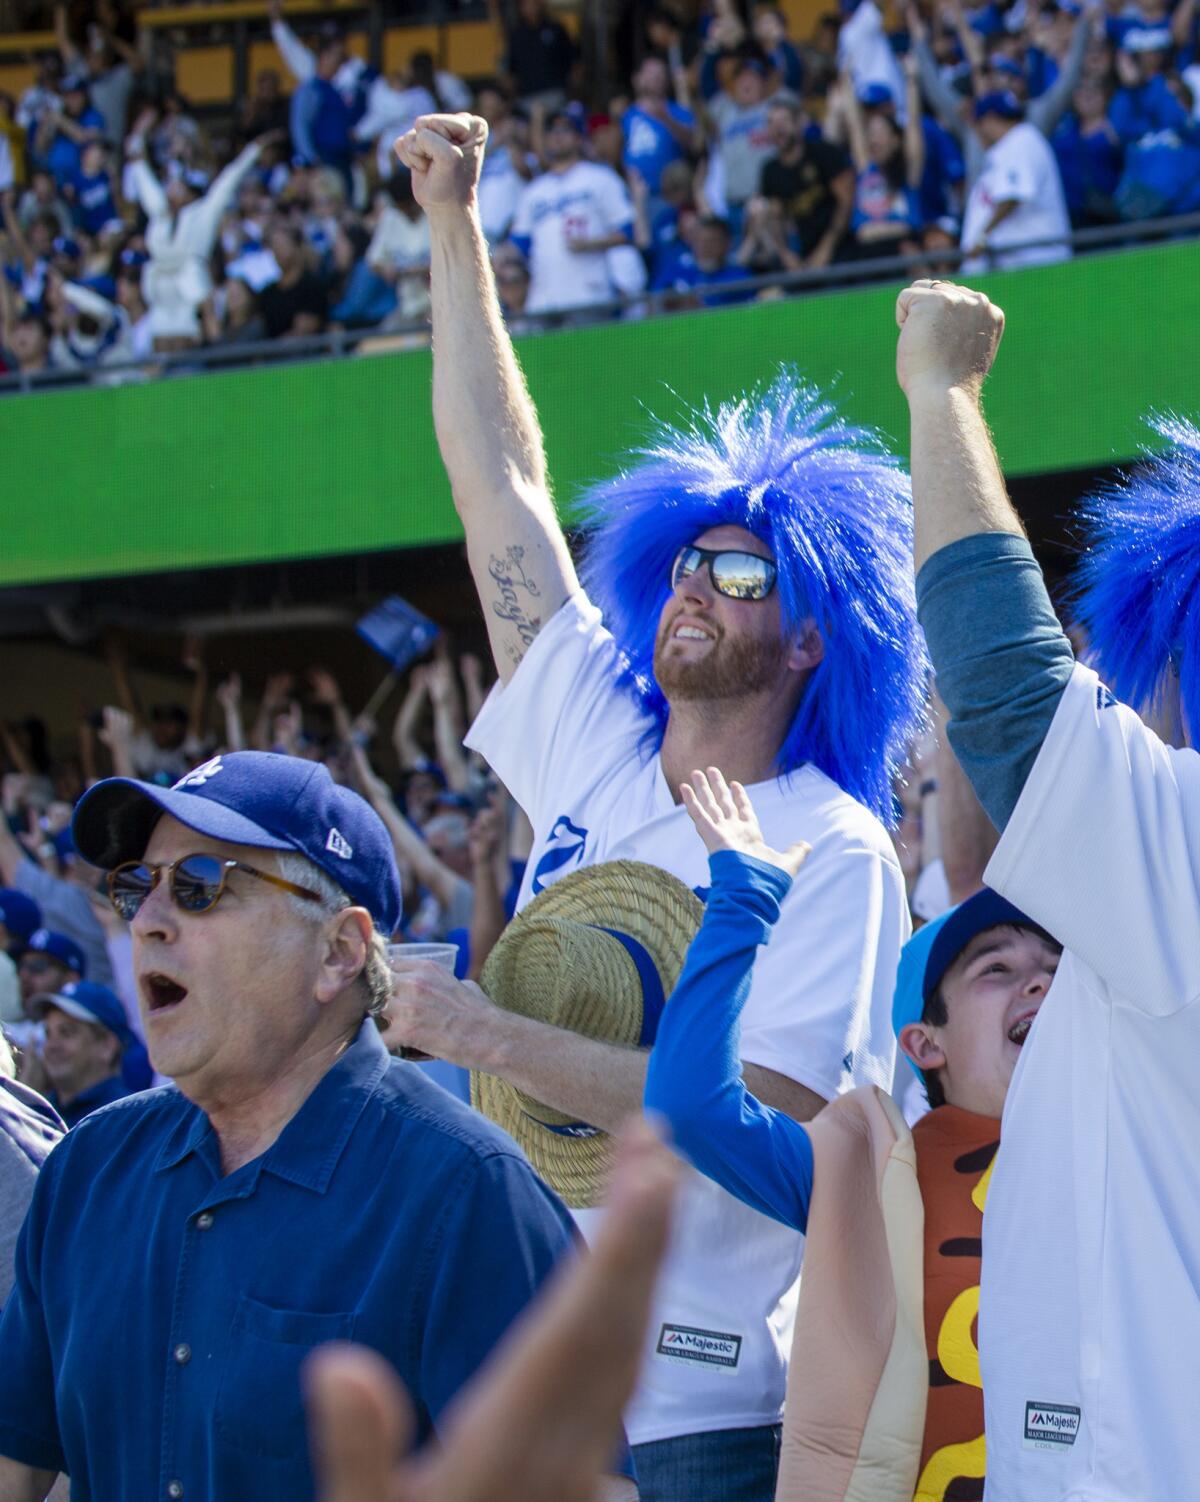 Dodgers fans celebrate Cody Bellinger’s seventh-inning home run. The Dodgers hit eight home runs, a major league record for opening day.